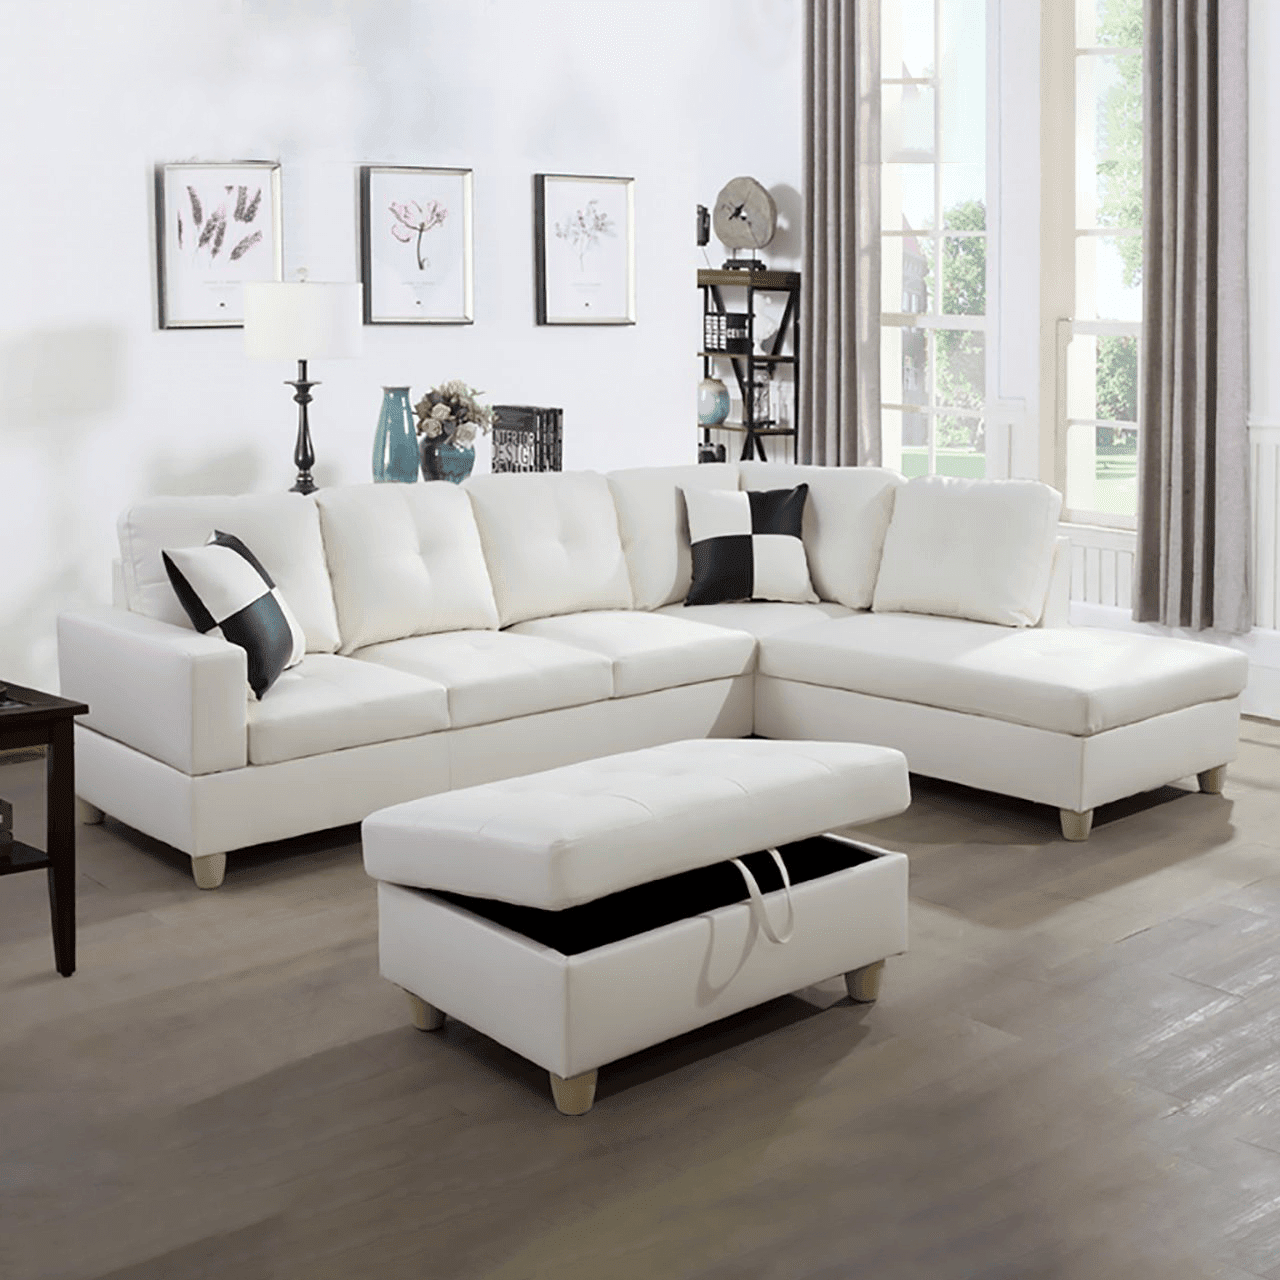 Prestige Kæreste korrelat Hommoo Convertible Sectional Sofa, L Shaped Couch for Small Space Living  Room, White(Without Ottoman) - Walmart.com